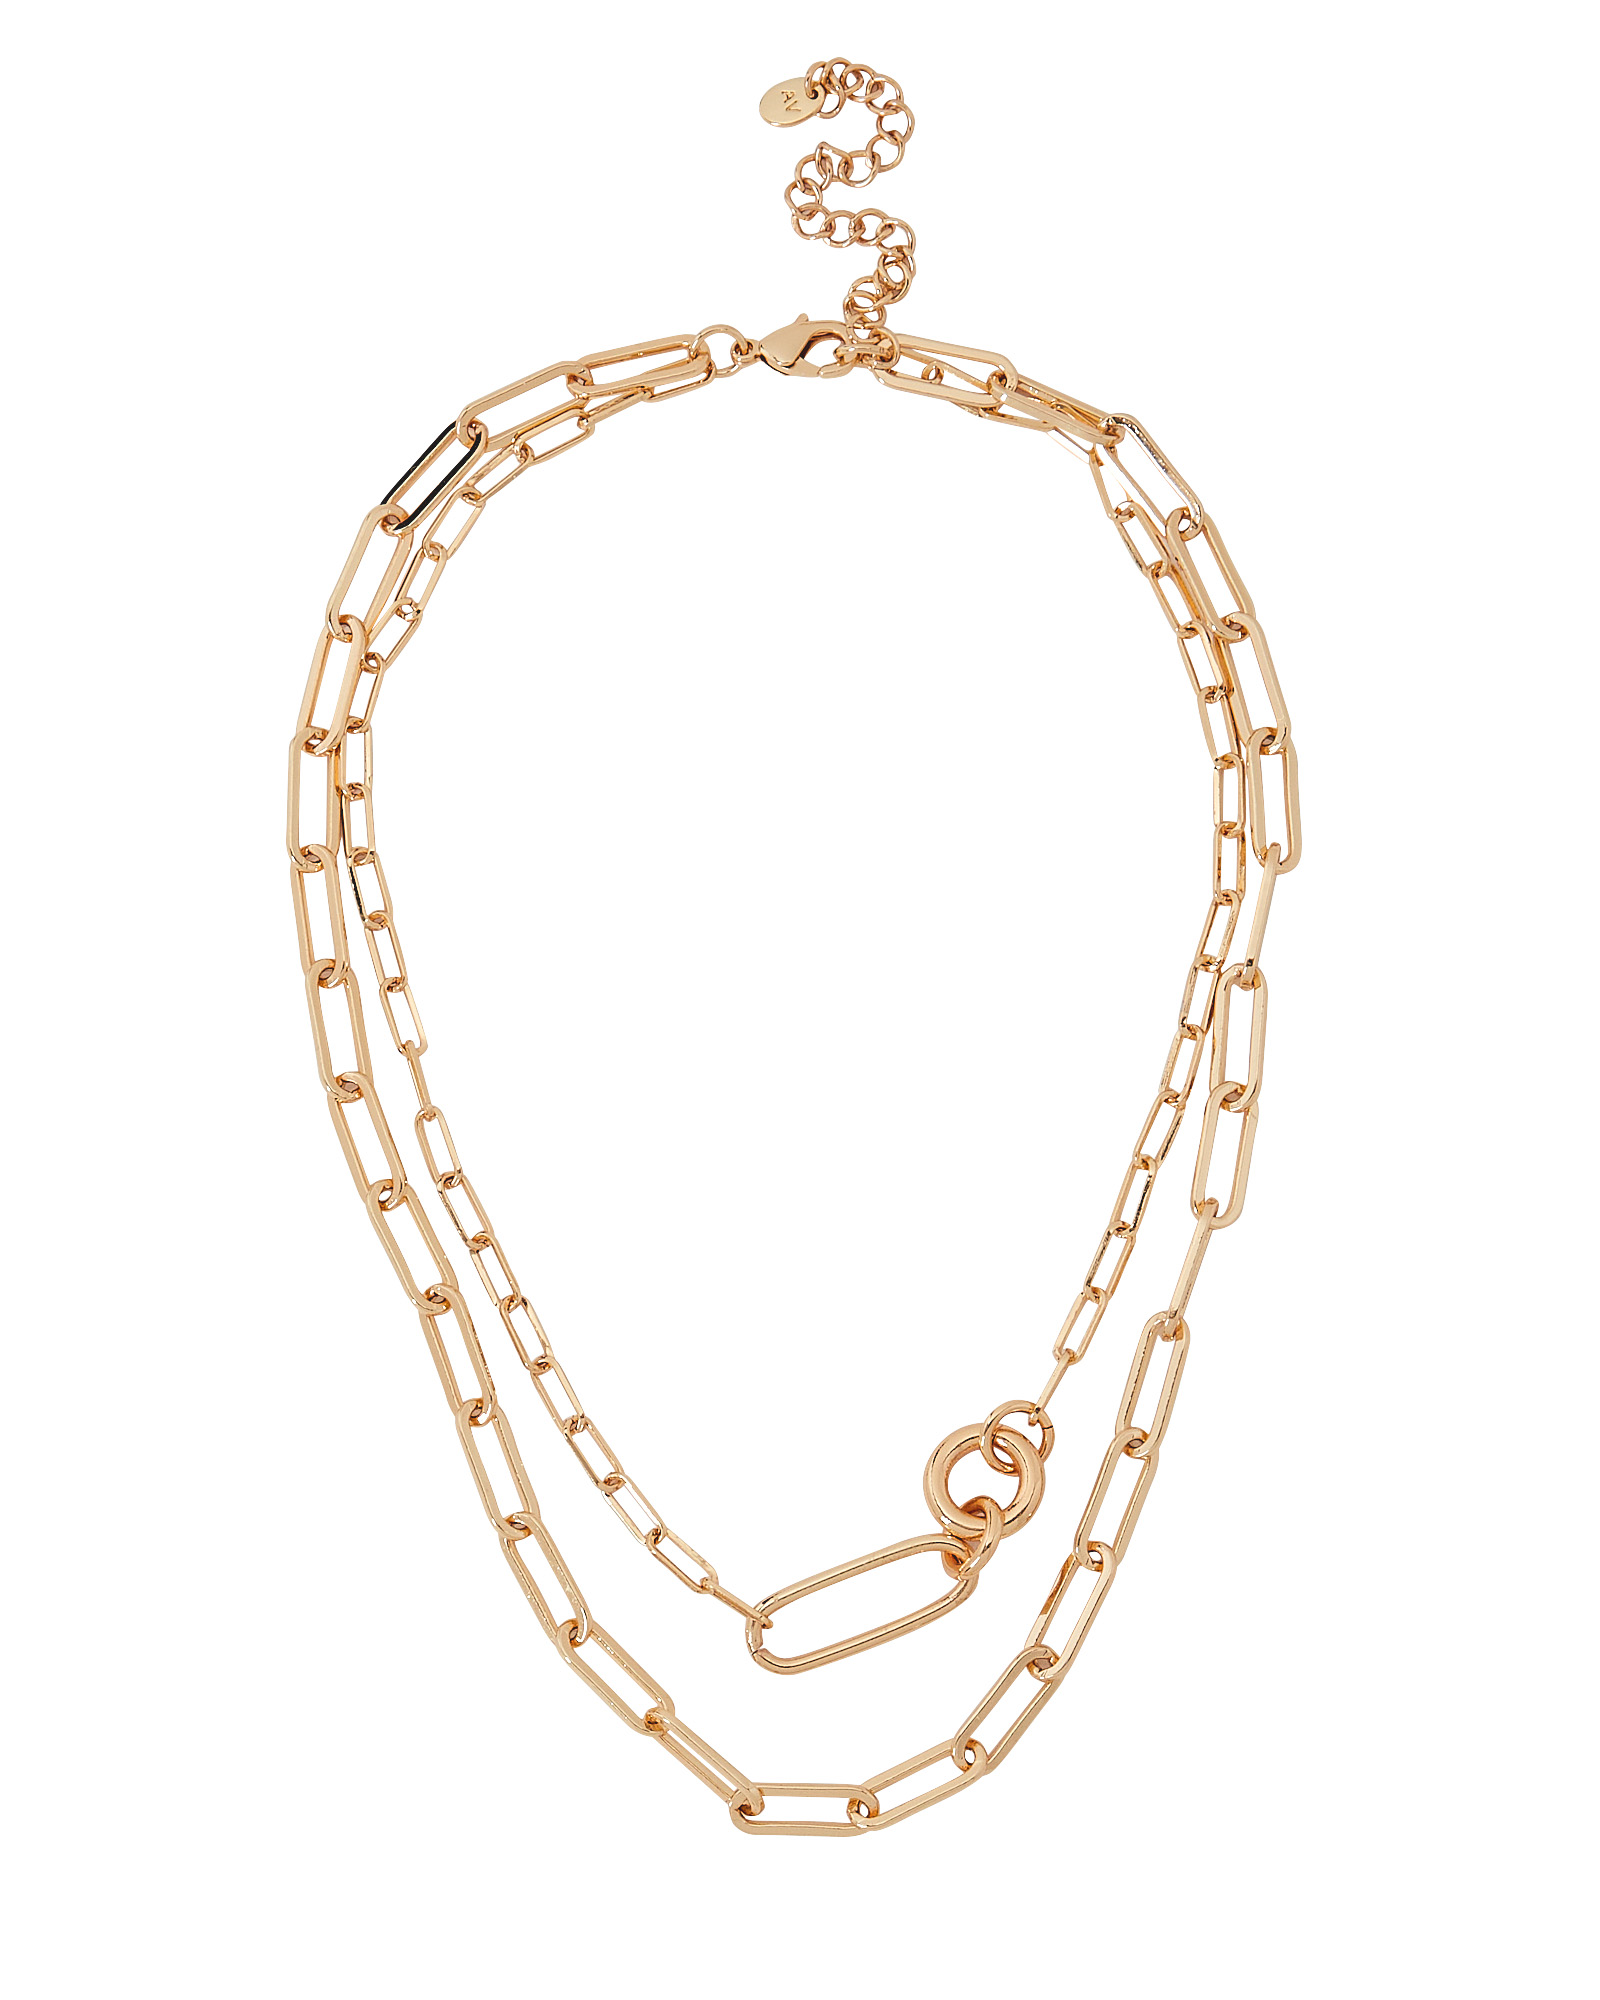 Argento Vivo Layered Oval Chain Necklace | INTERMIX®